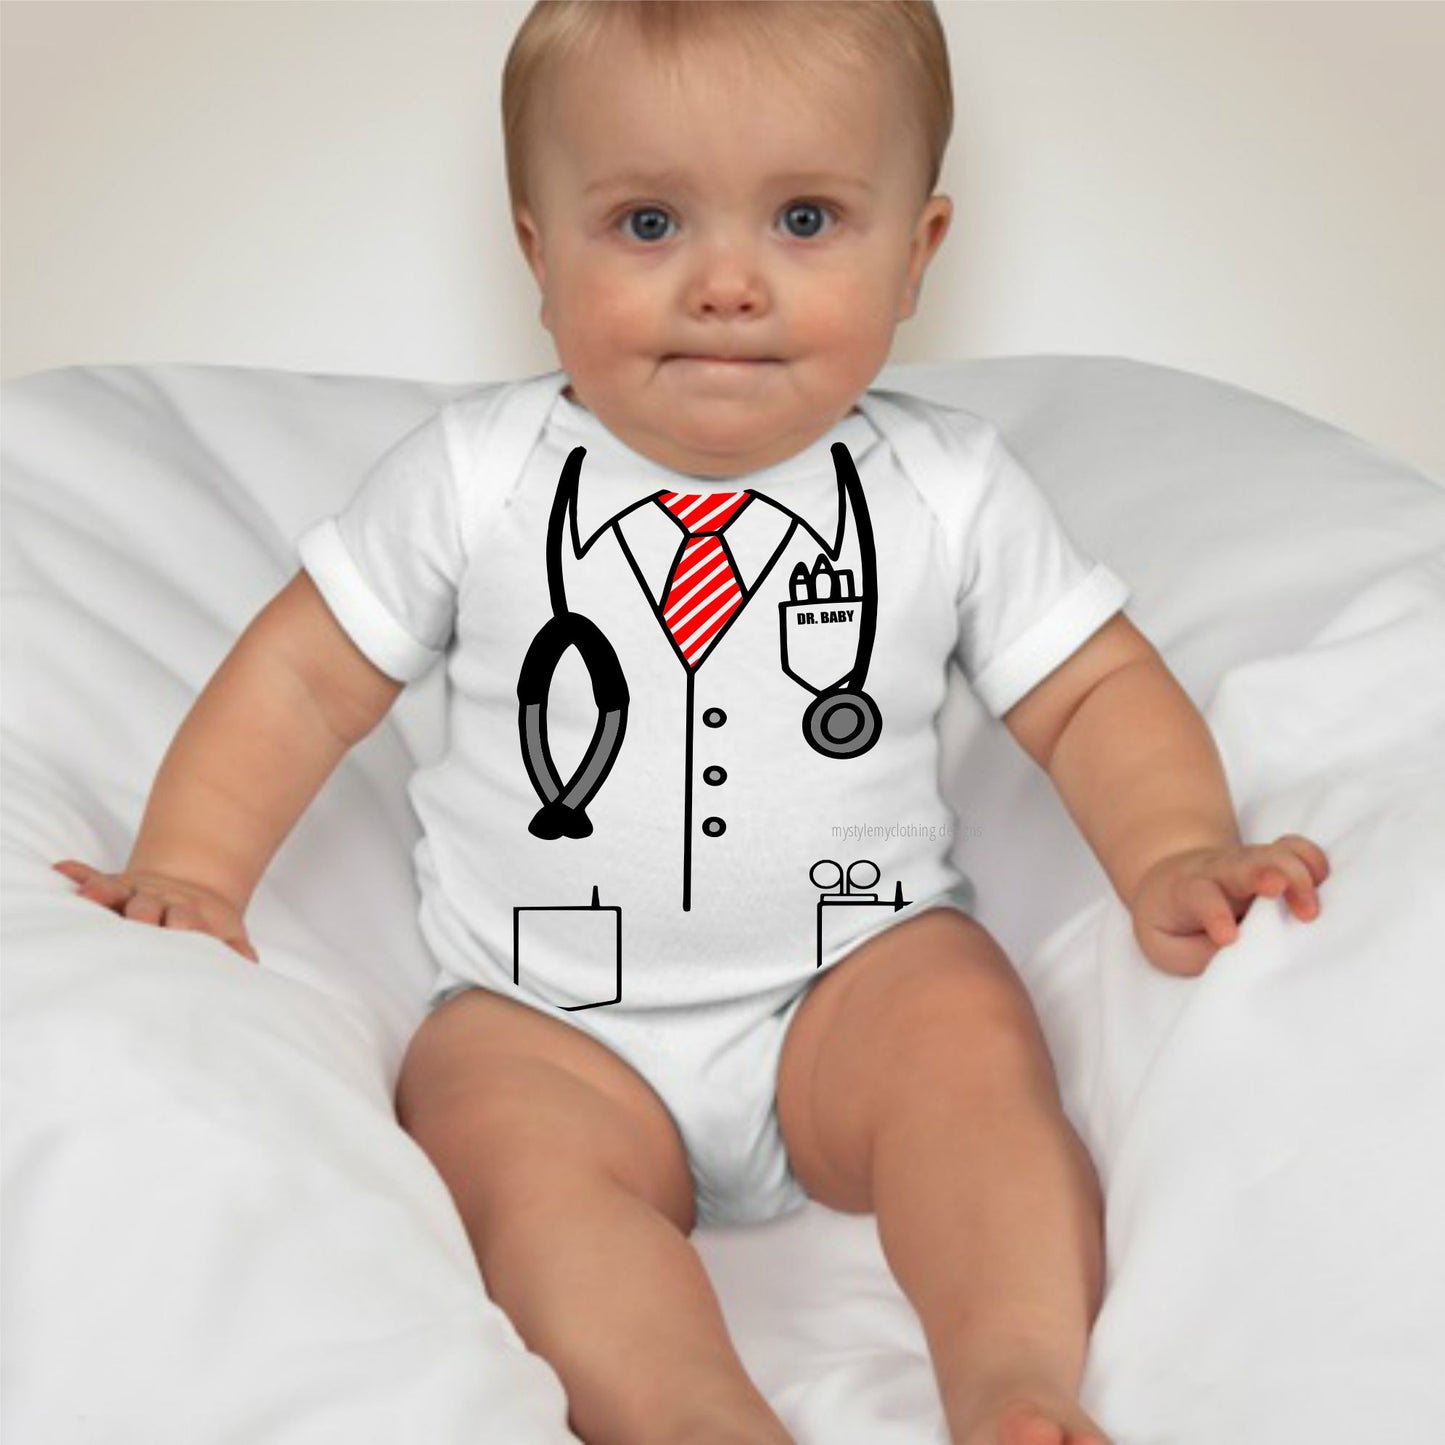 Baby Career Onesies - Doctor Scrub Suit Stripes Red Necktie with FREE Name Print - MYSTYLEMYCLOTHING